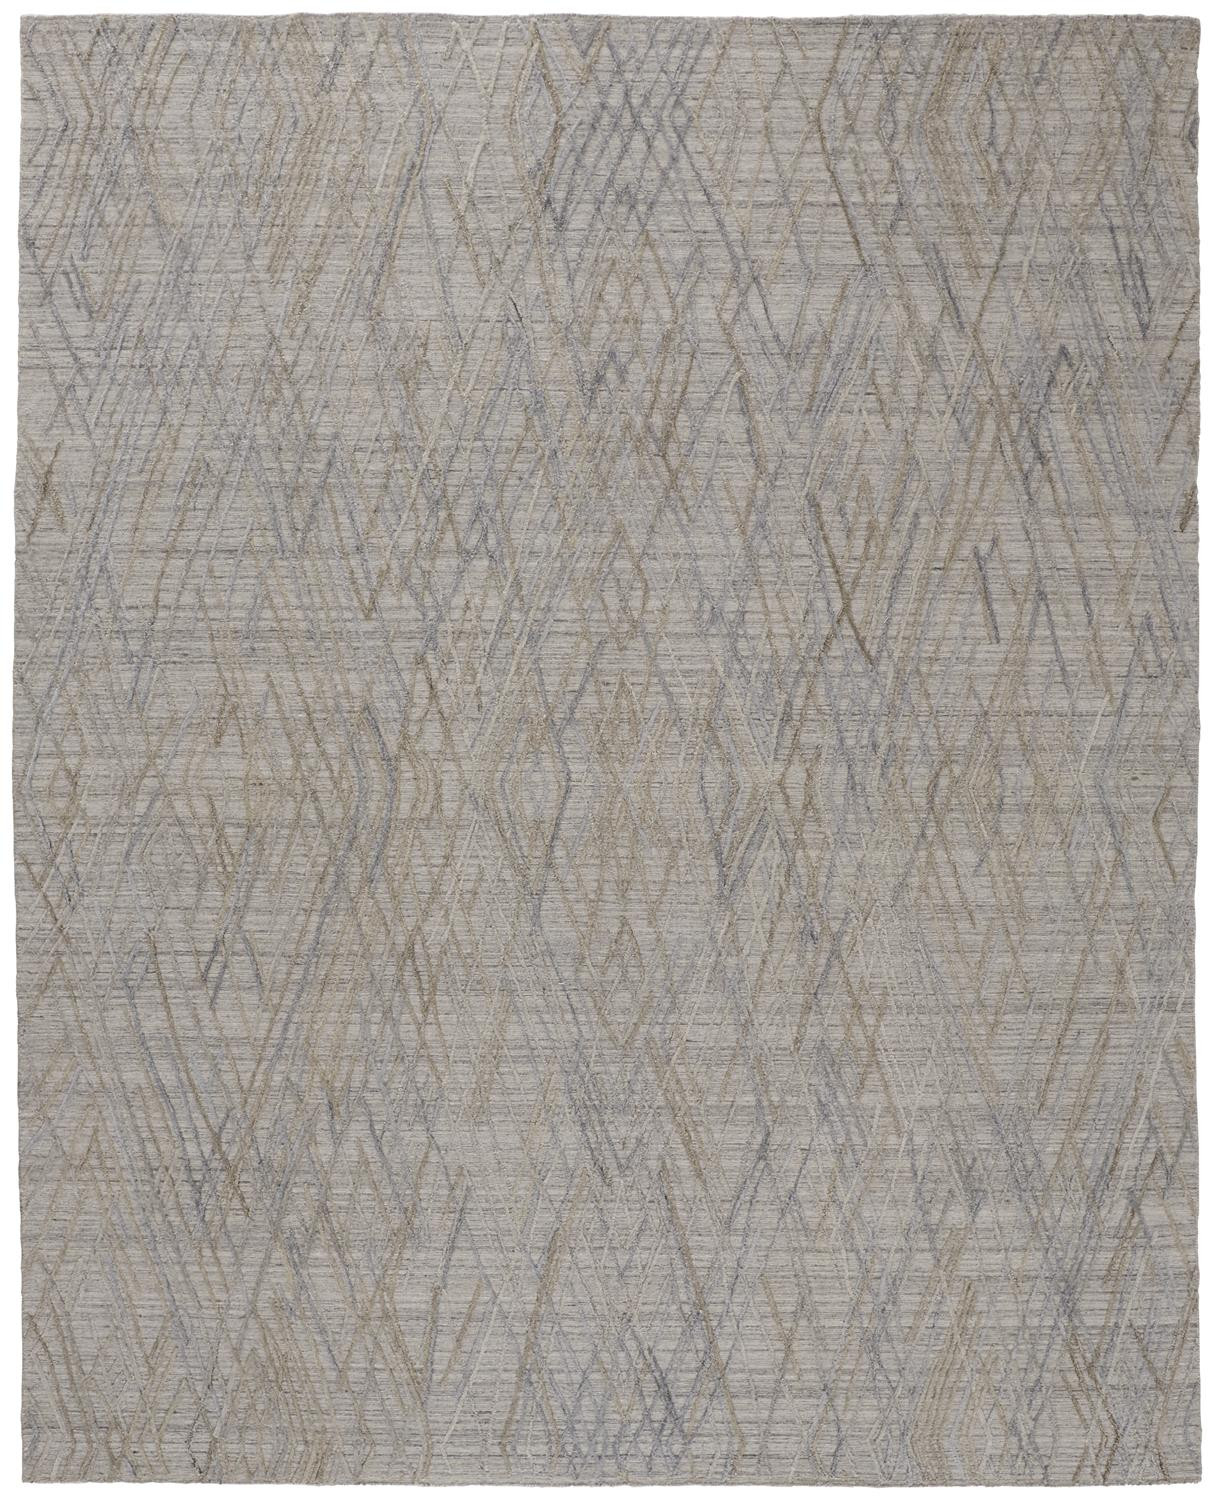 4' X 6' Gray And Blue Abstract Hand Woven Area Rug-513544-1